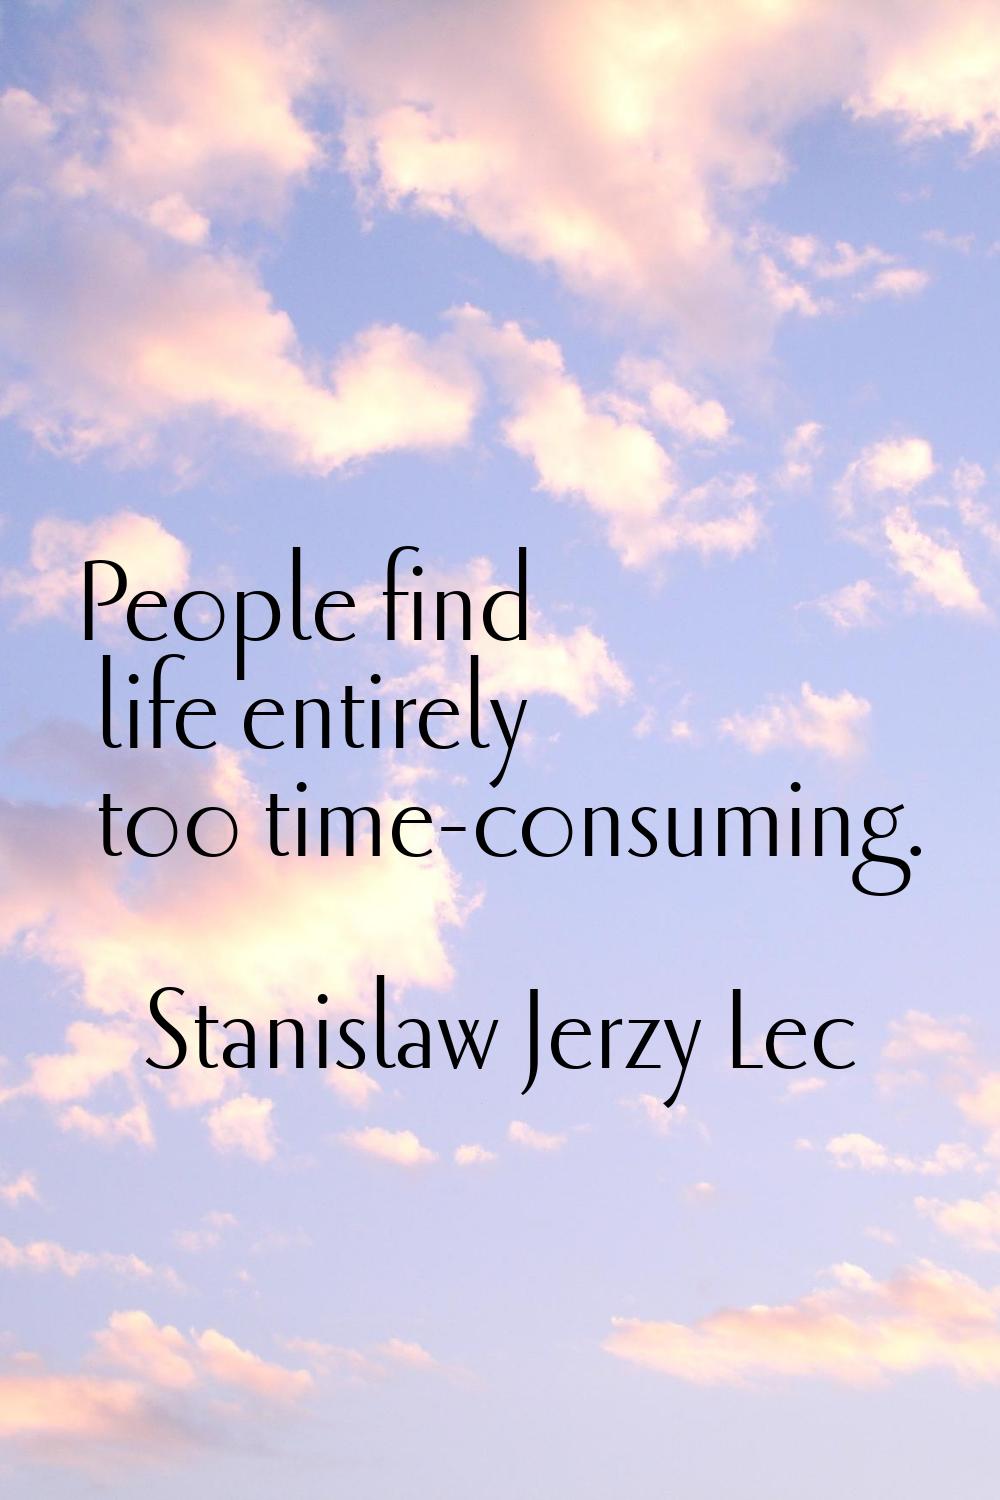 People find life entirely too time-consuming.